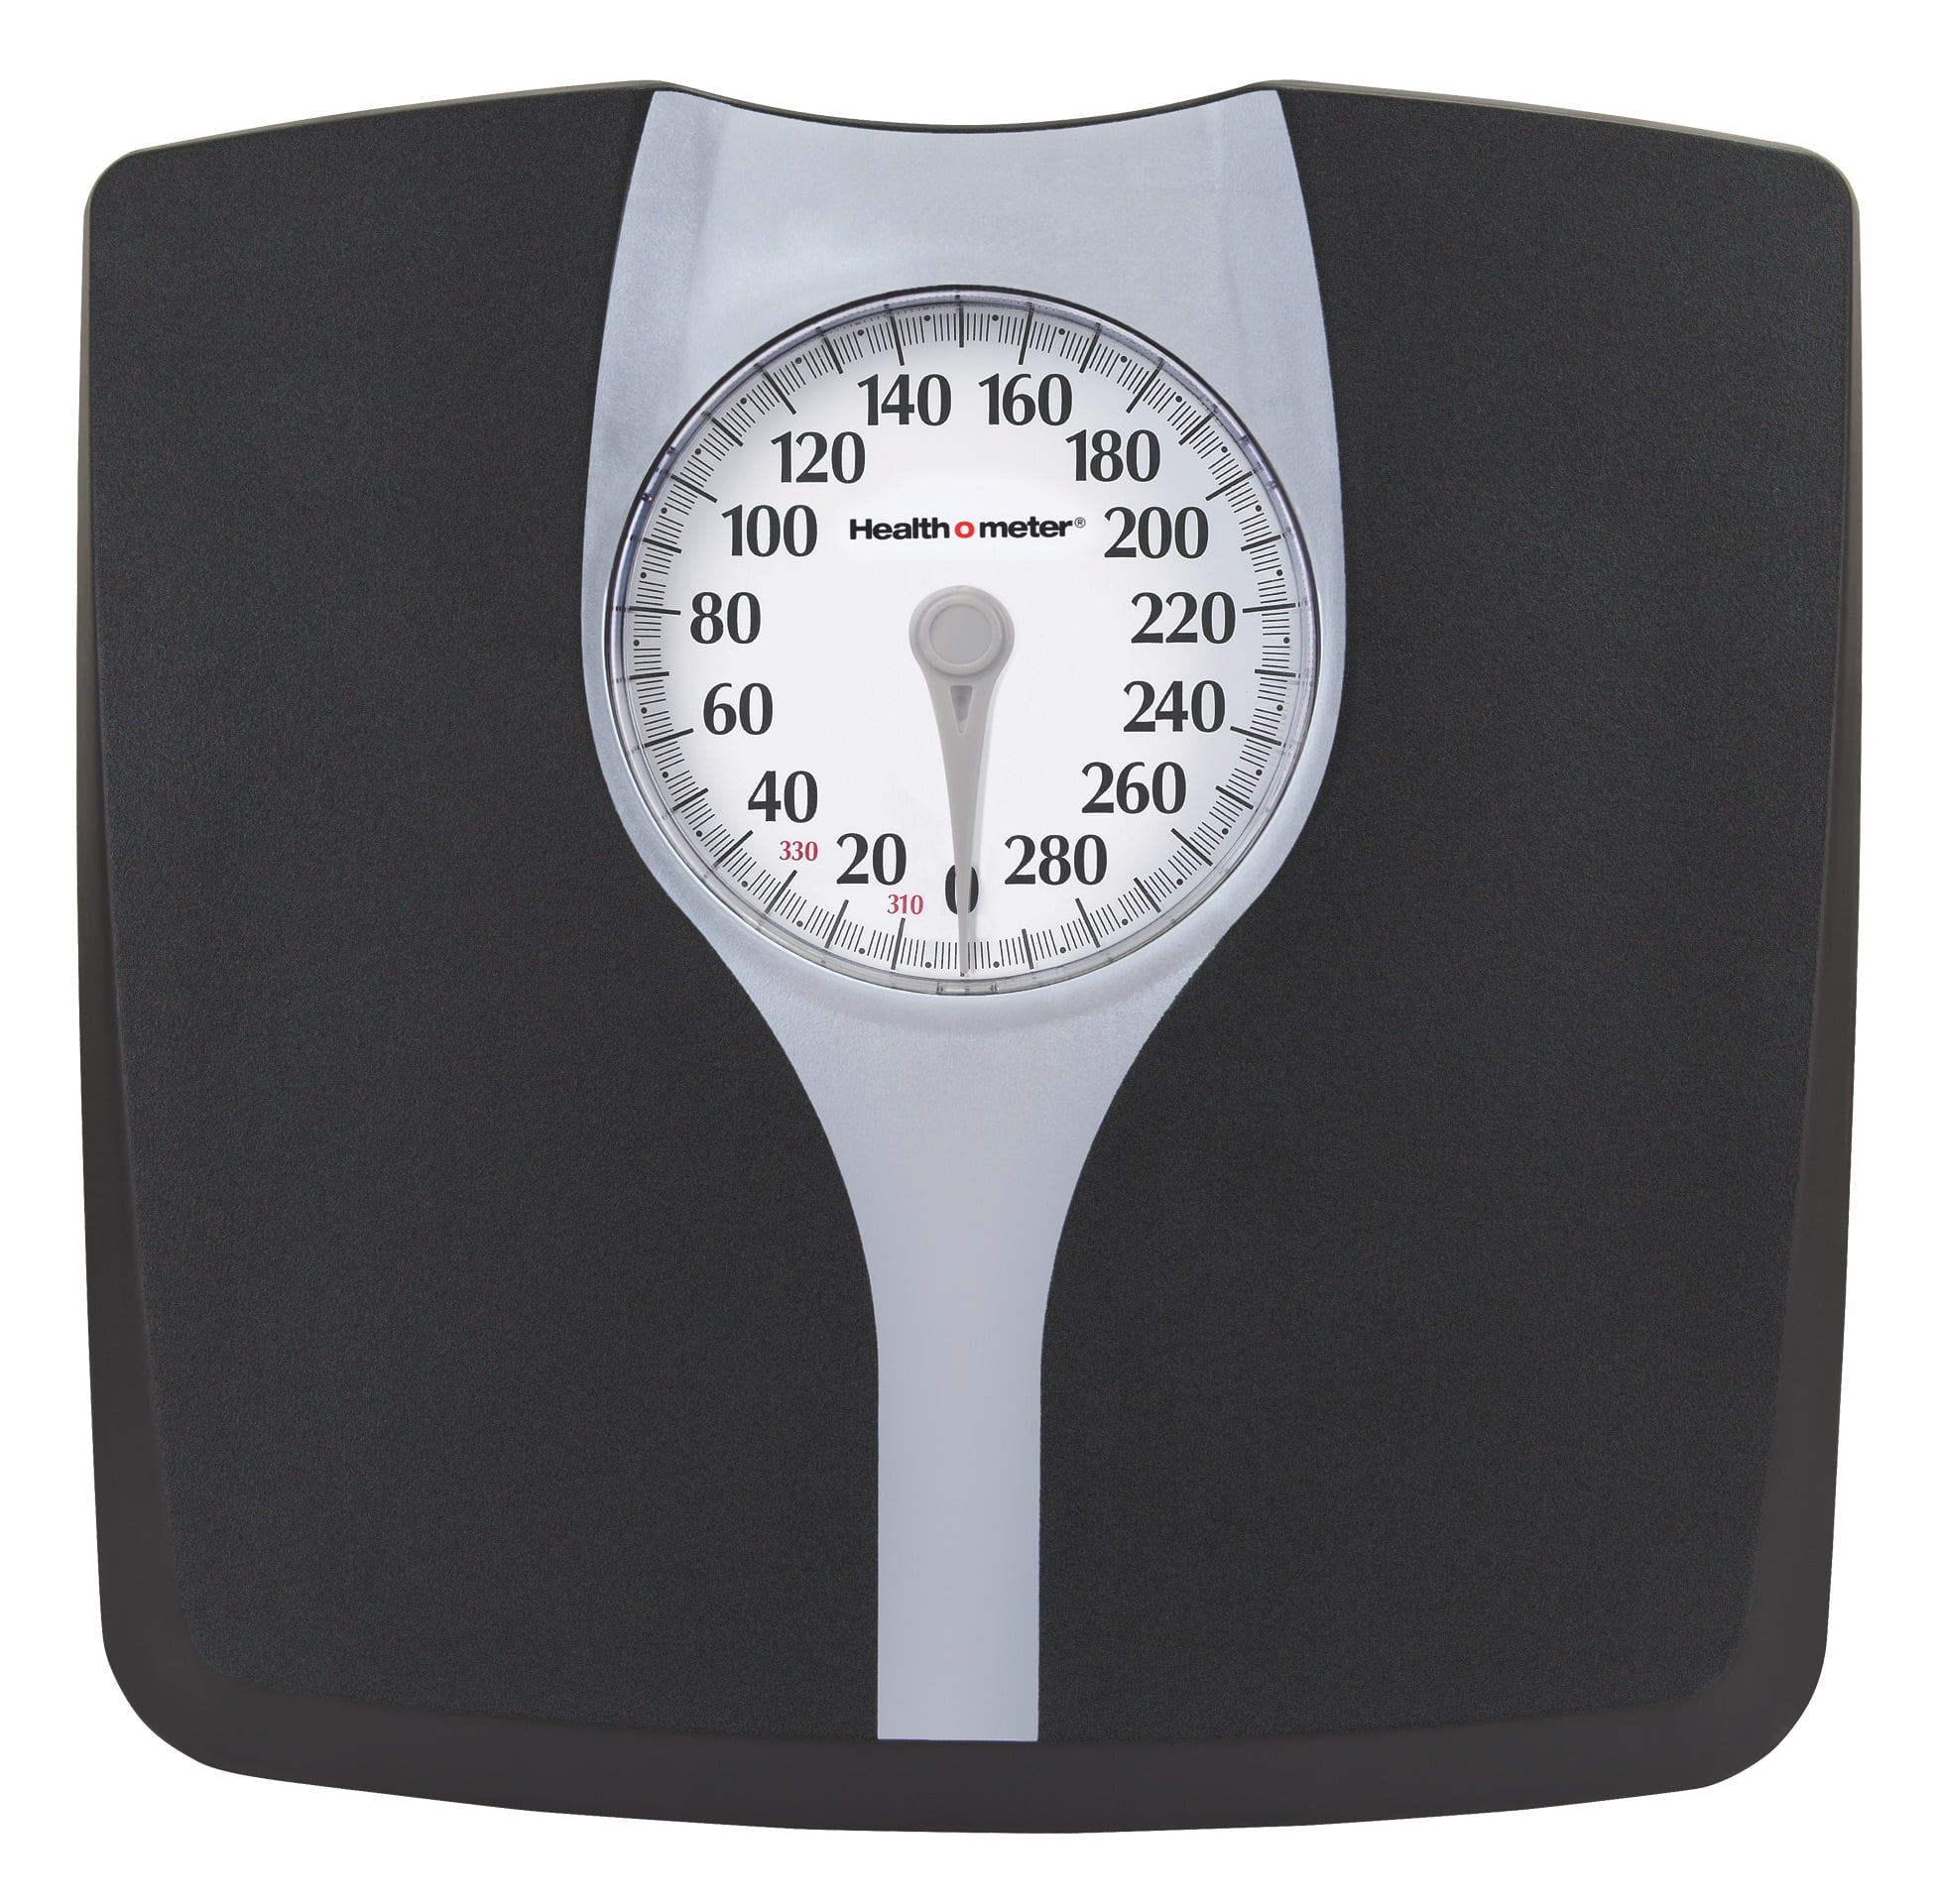 Health O Meter Bathroom Scale - health and beauty - by owner